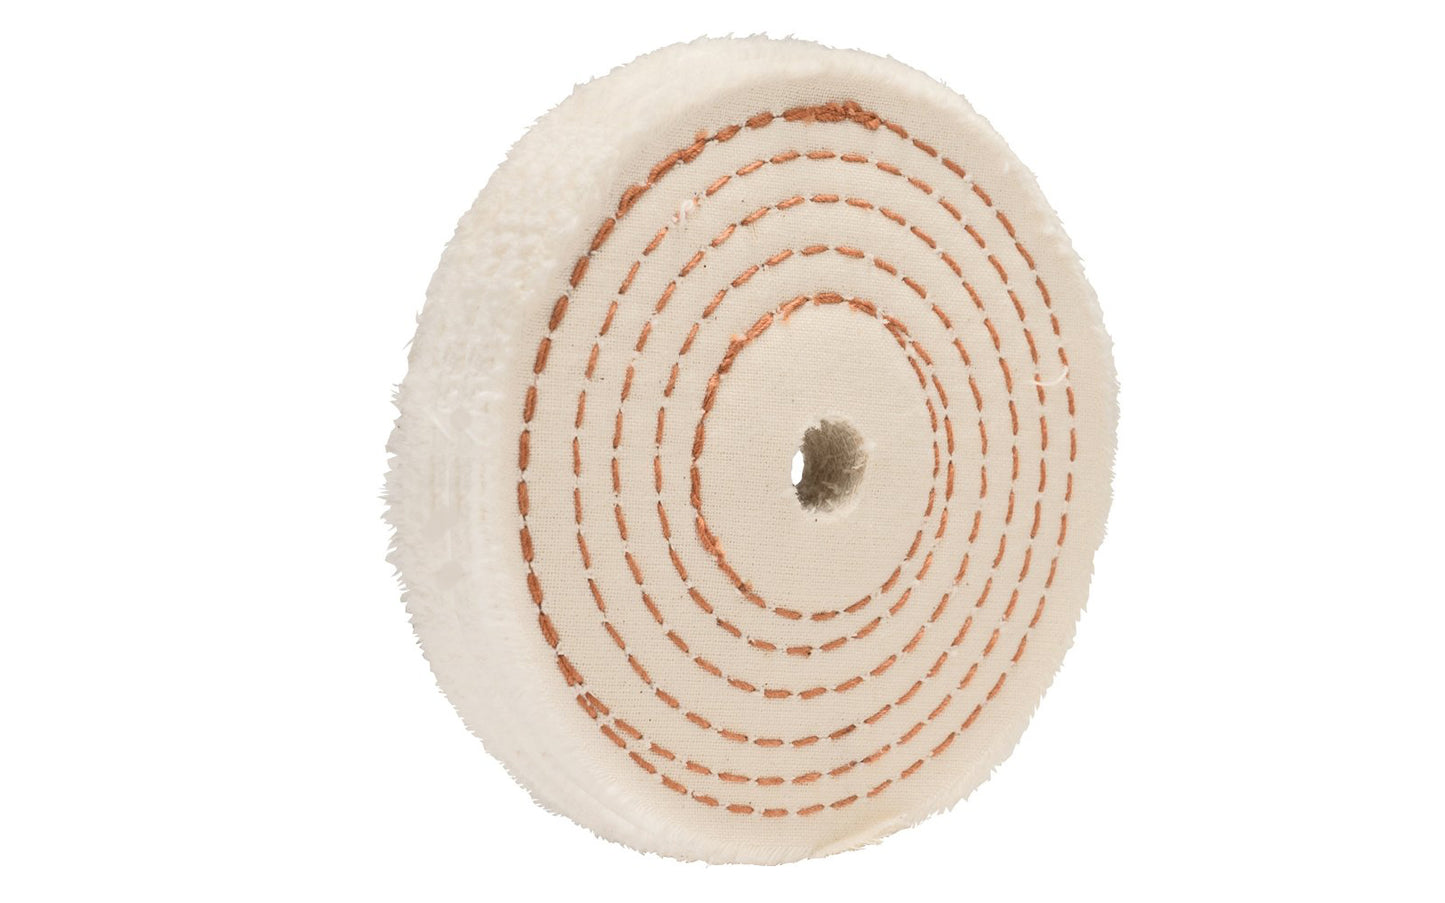 4" Spiral Sewn Buffing Wheel ~ 1" Thick is a workhorse for aggressive cutting & coarse buffing. 1/2" hole diameter. 1" wide thickness. Spiral sewn wheel for prolong service. For coarse cutting & buffing, & flexible grinding. Stiffer cotton sheeting held together with 1/4" wide spiral sewn lockstitch sewing. Dico 528-80-4. Made in USA.